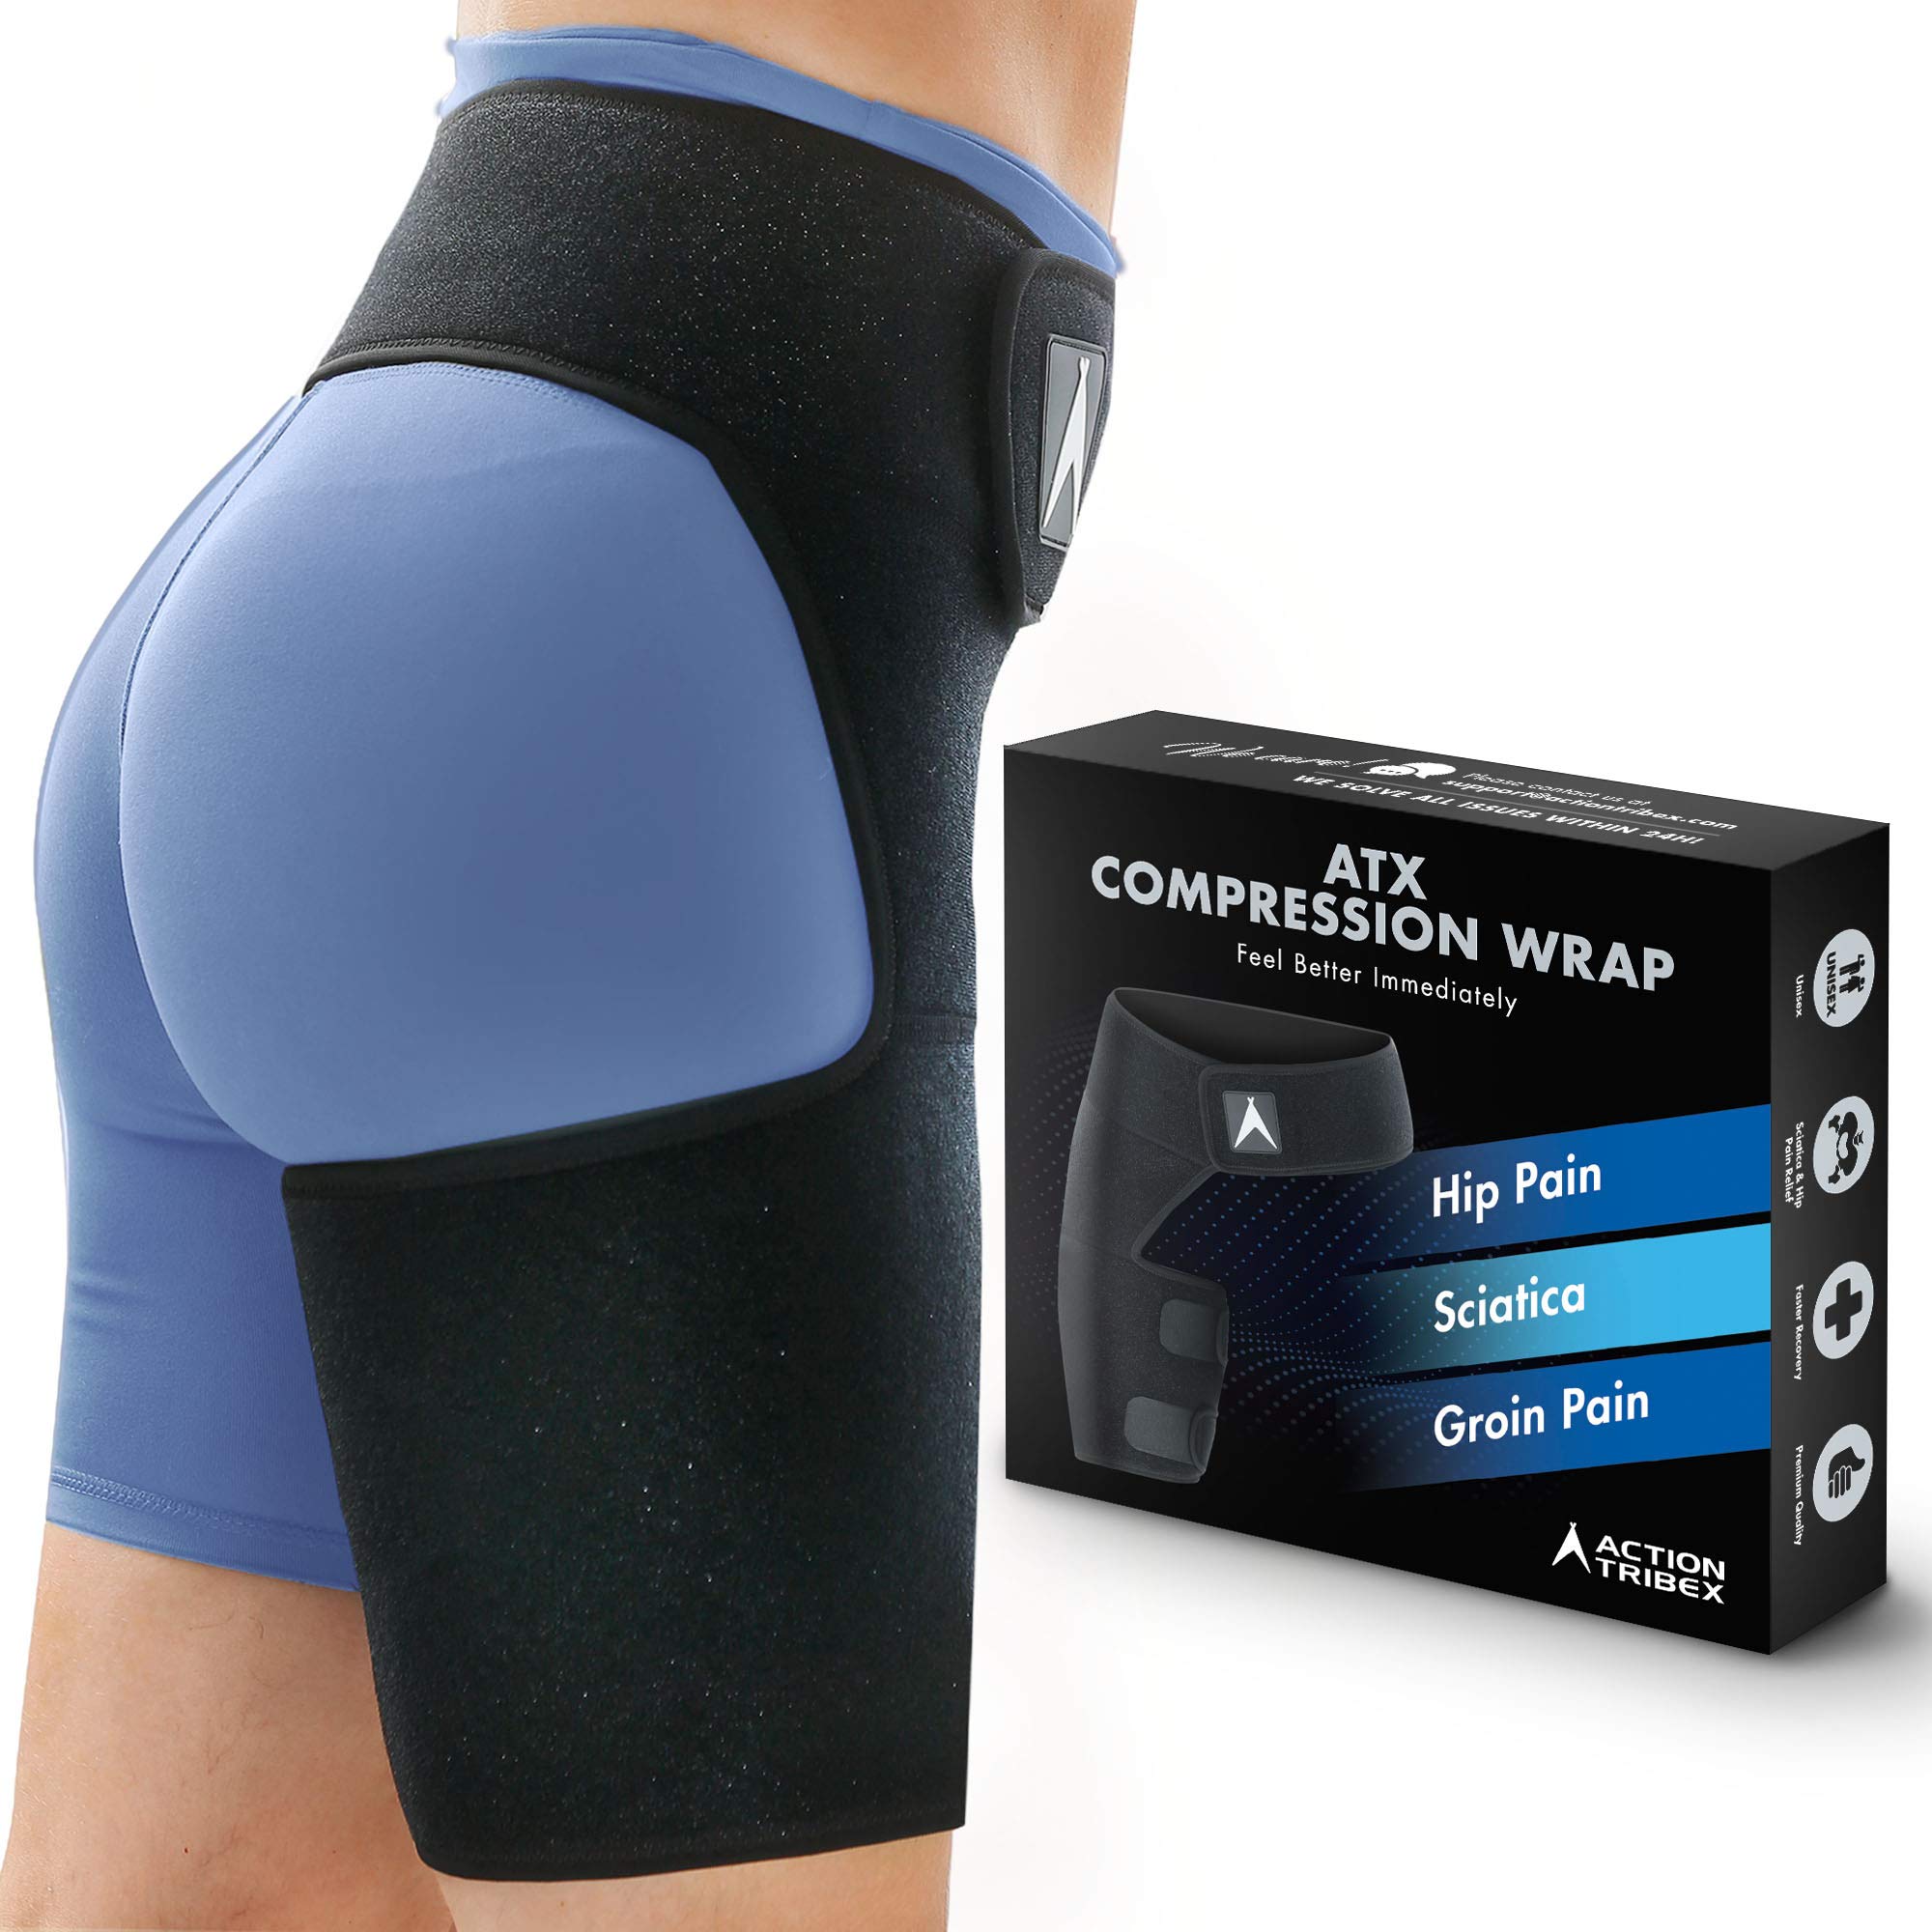 ATX Compression Wrap - Hip and Groin Support - Sciatica Nerve Pain